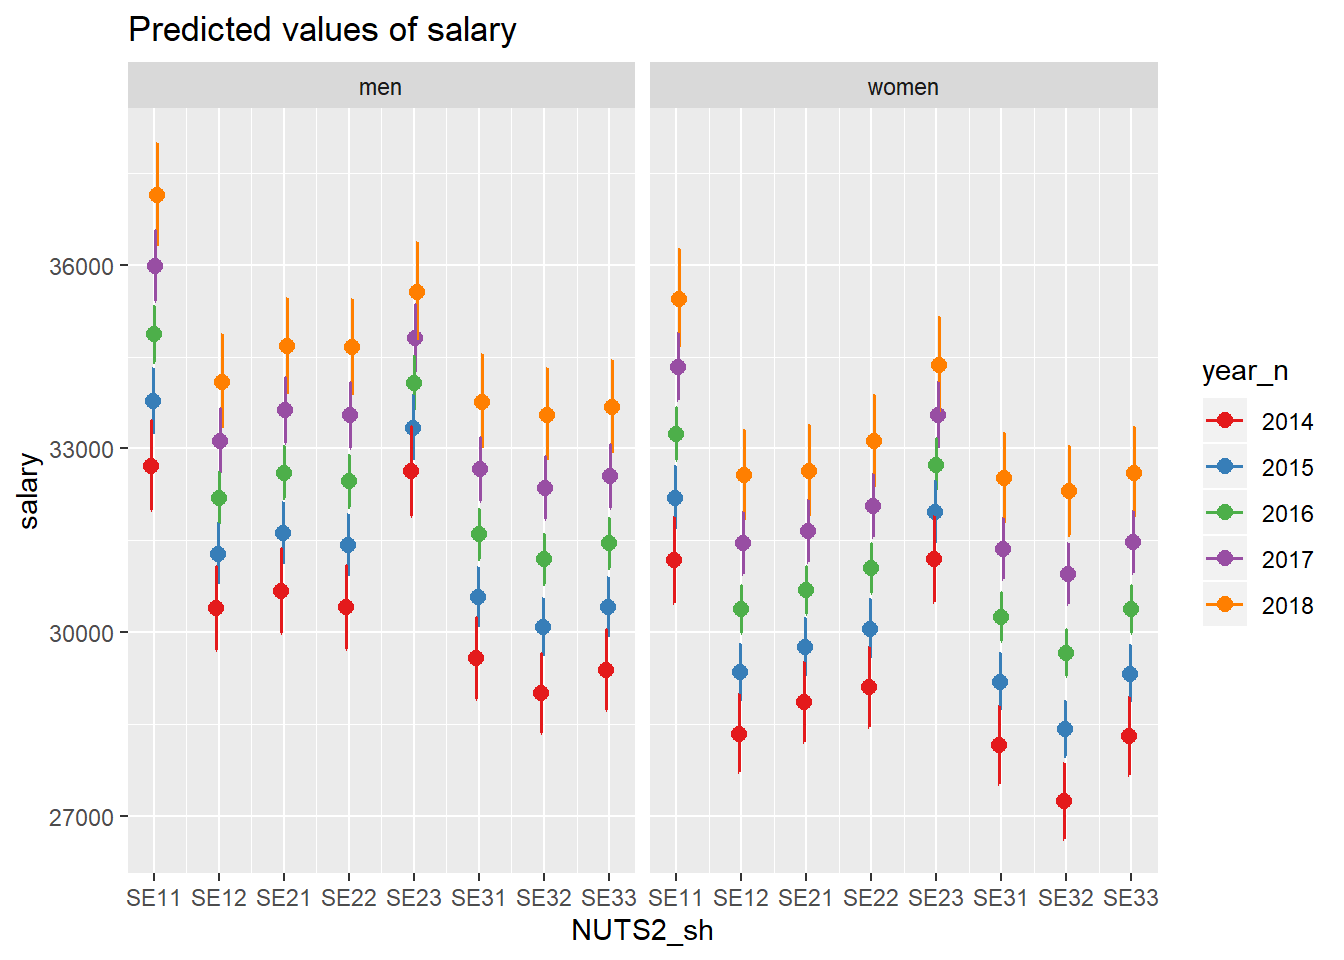 Lowest F-value interaction region, year and gender, Police officers